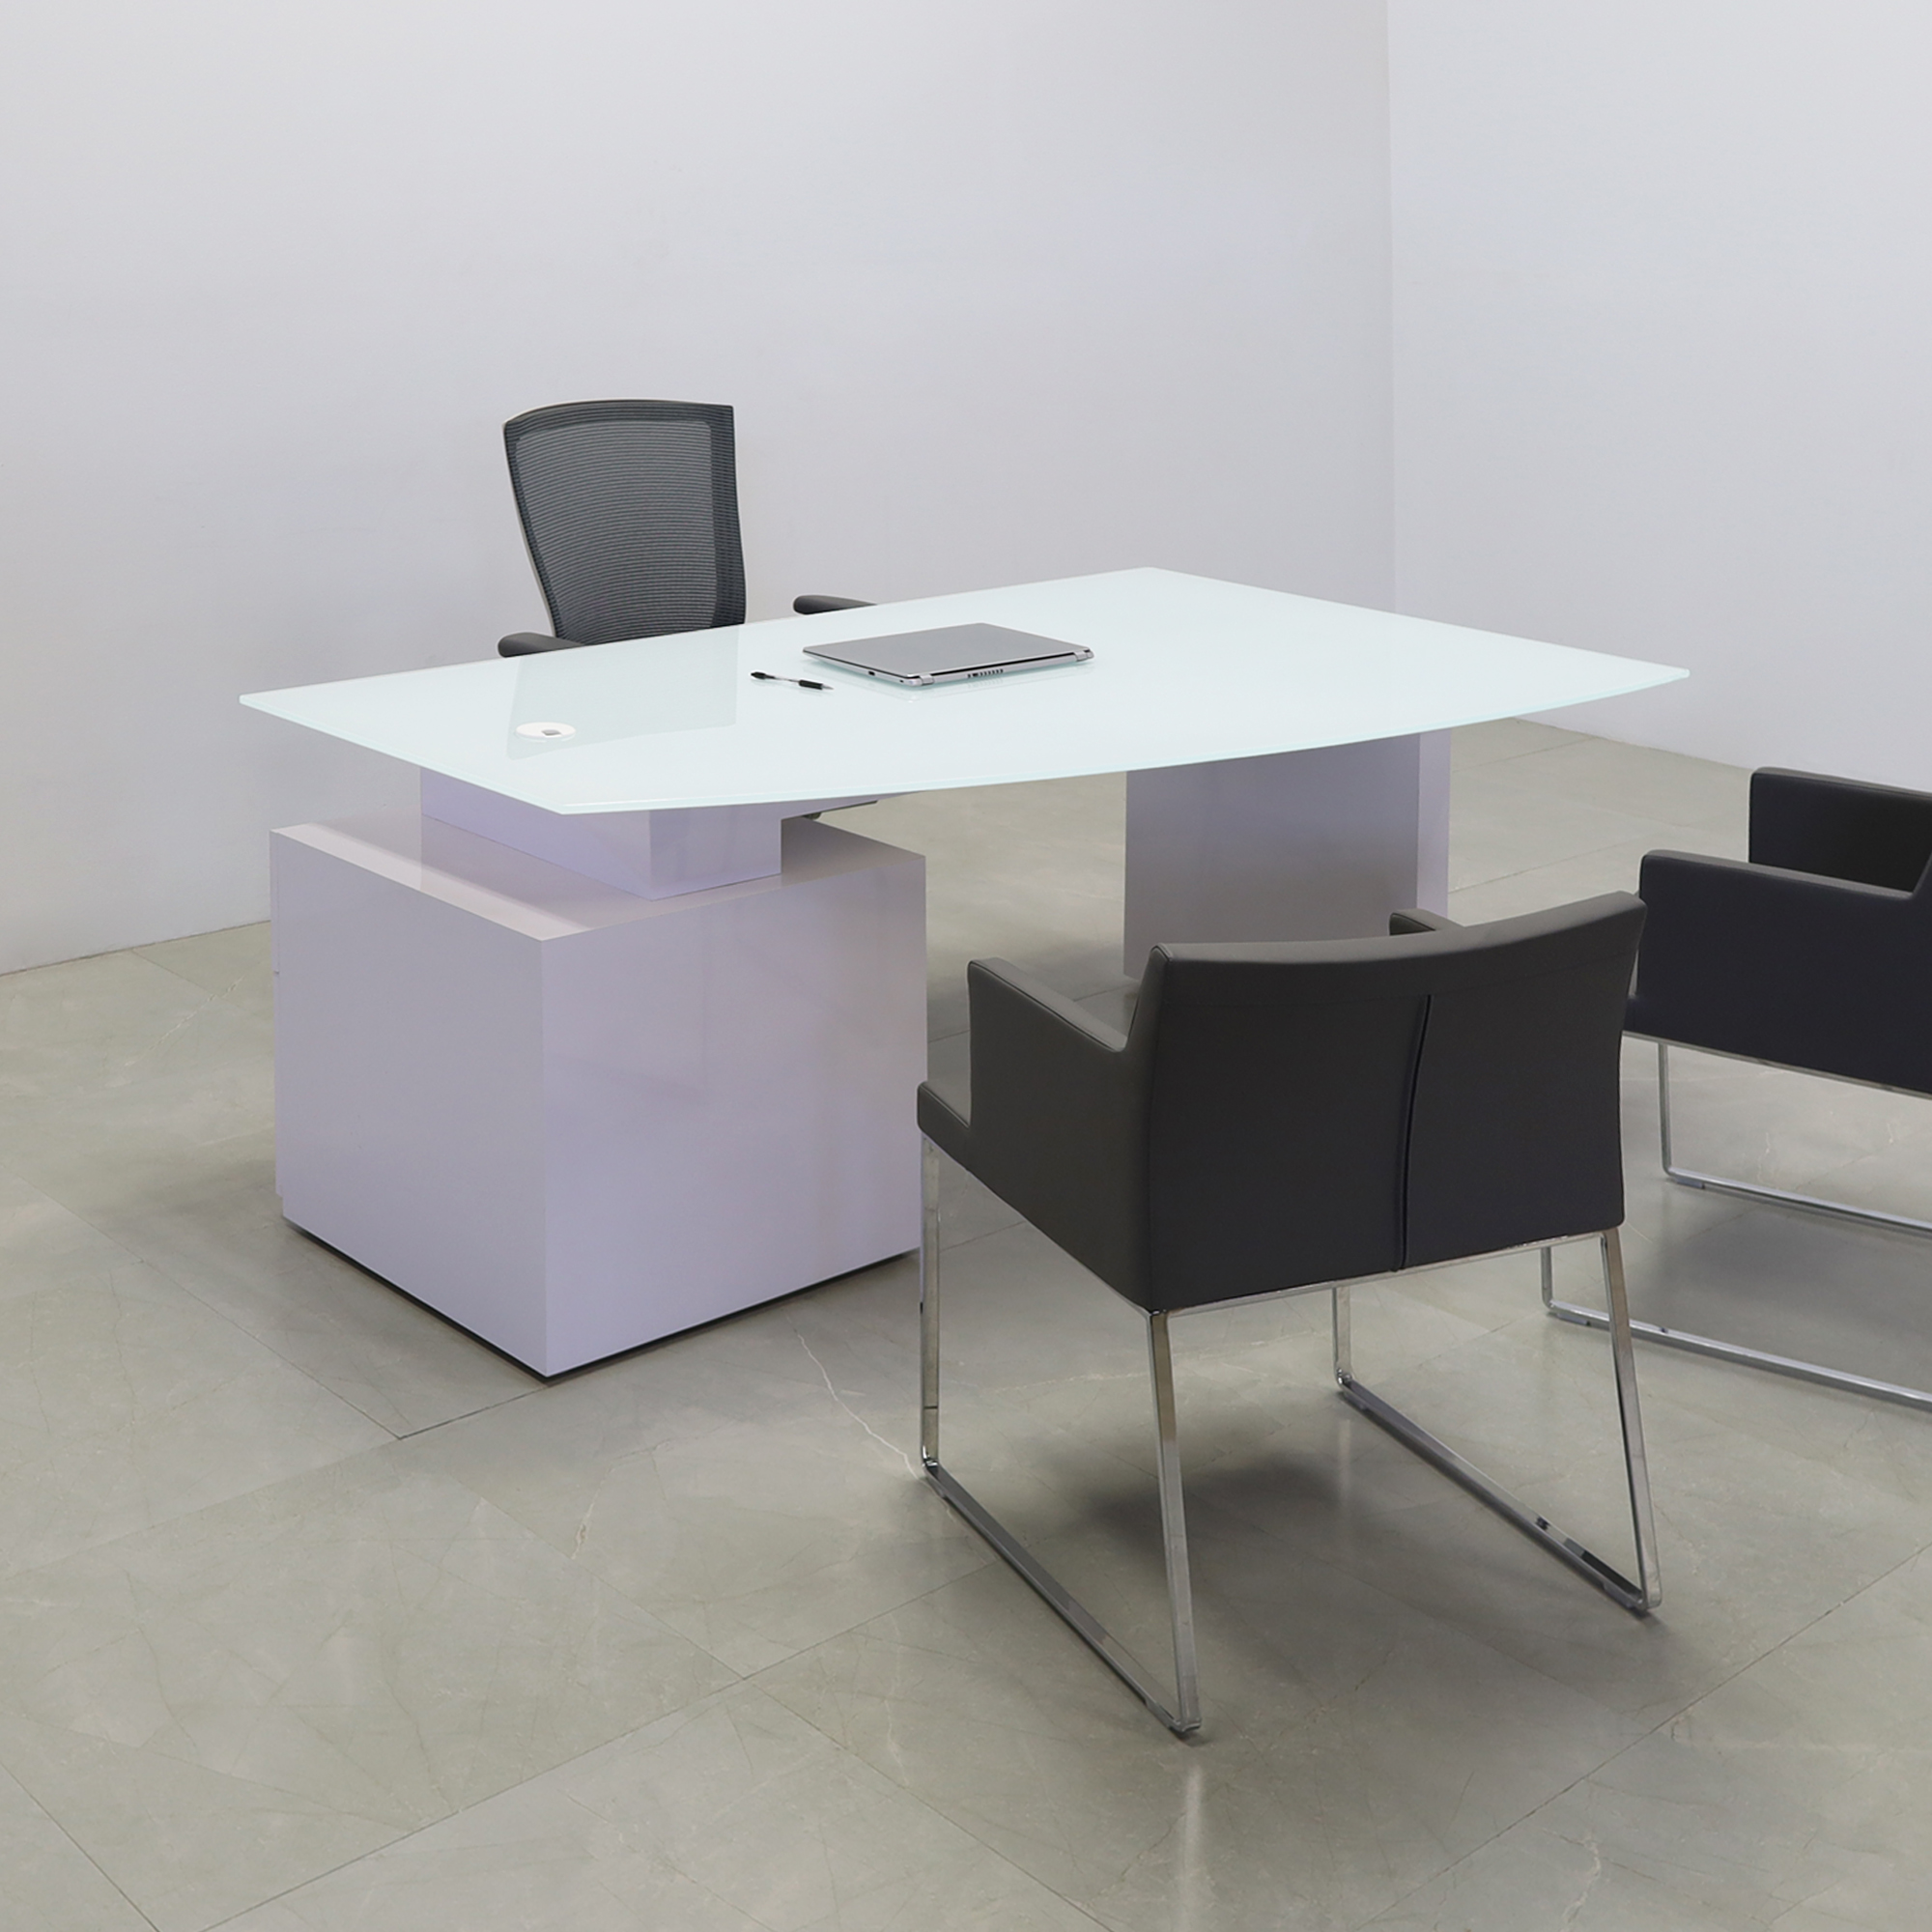 Avenue Curved Executive Desk With Tempered Glass Top in white top nad white gloss laminate base & storage shown here.